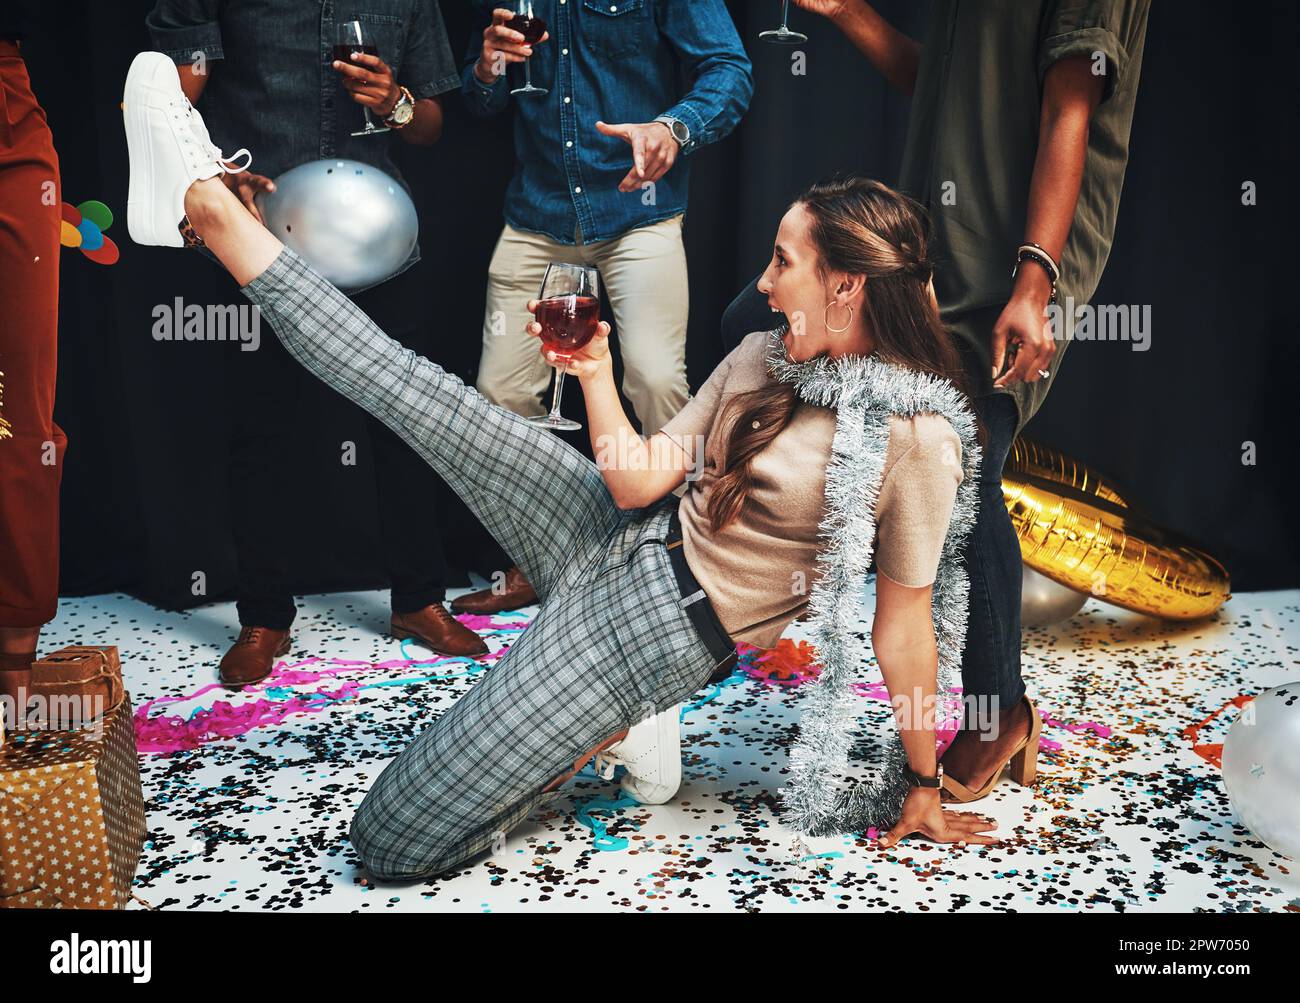 https://c8.alamy.com/comp/2PW7050/woman-dancing-and-wine-for-celebration-with-friends-on-floor-with-confetti-alcohol-and-dance-moves-for-new-years-birthday-or-christmas-event-drunk-2PW7050.jpg